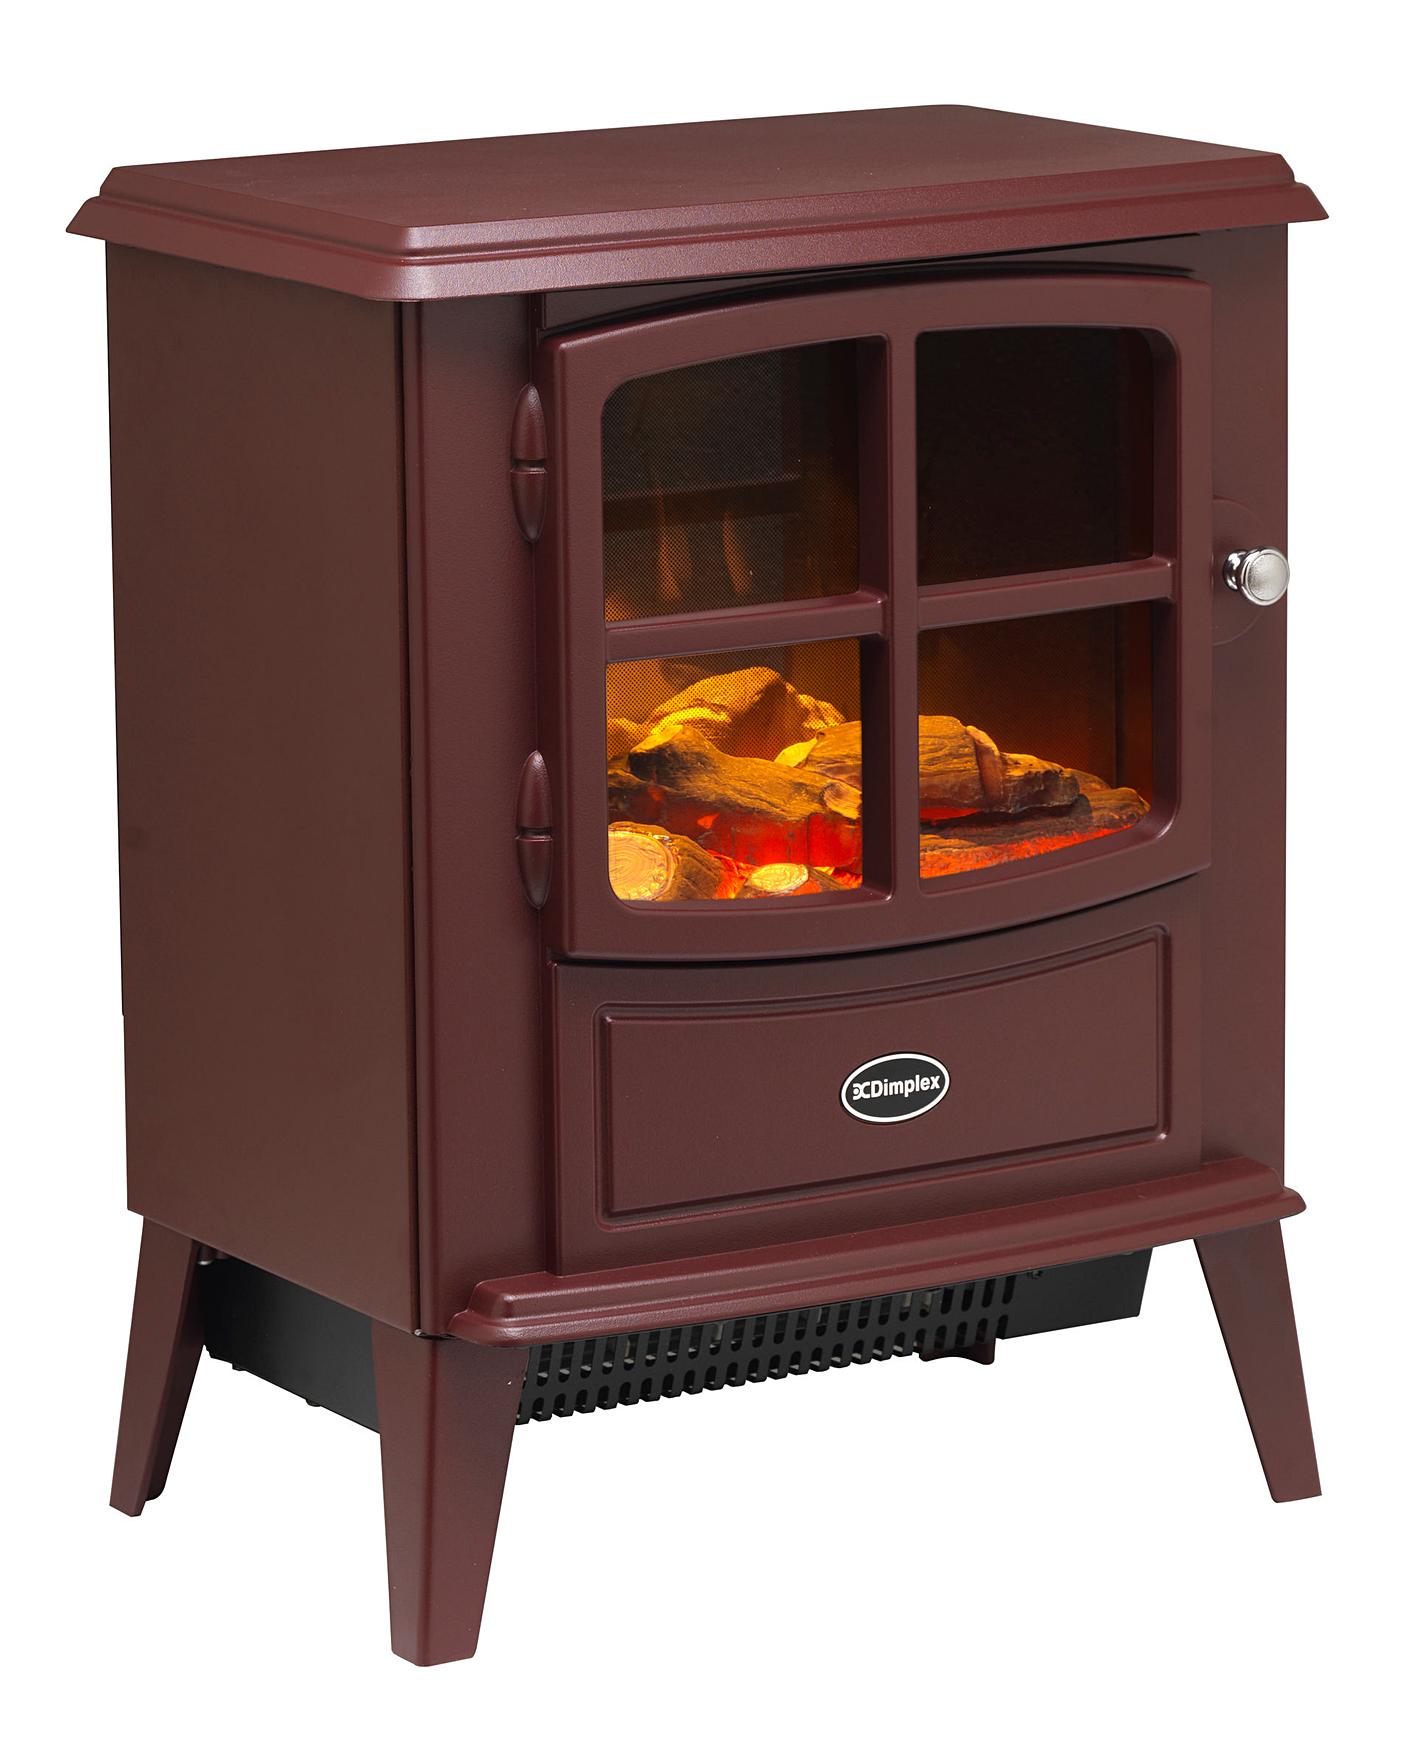 Yankee Fireplace Awesome Dimplex Brayford Burgundy Optiflame Electric Stove